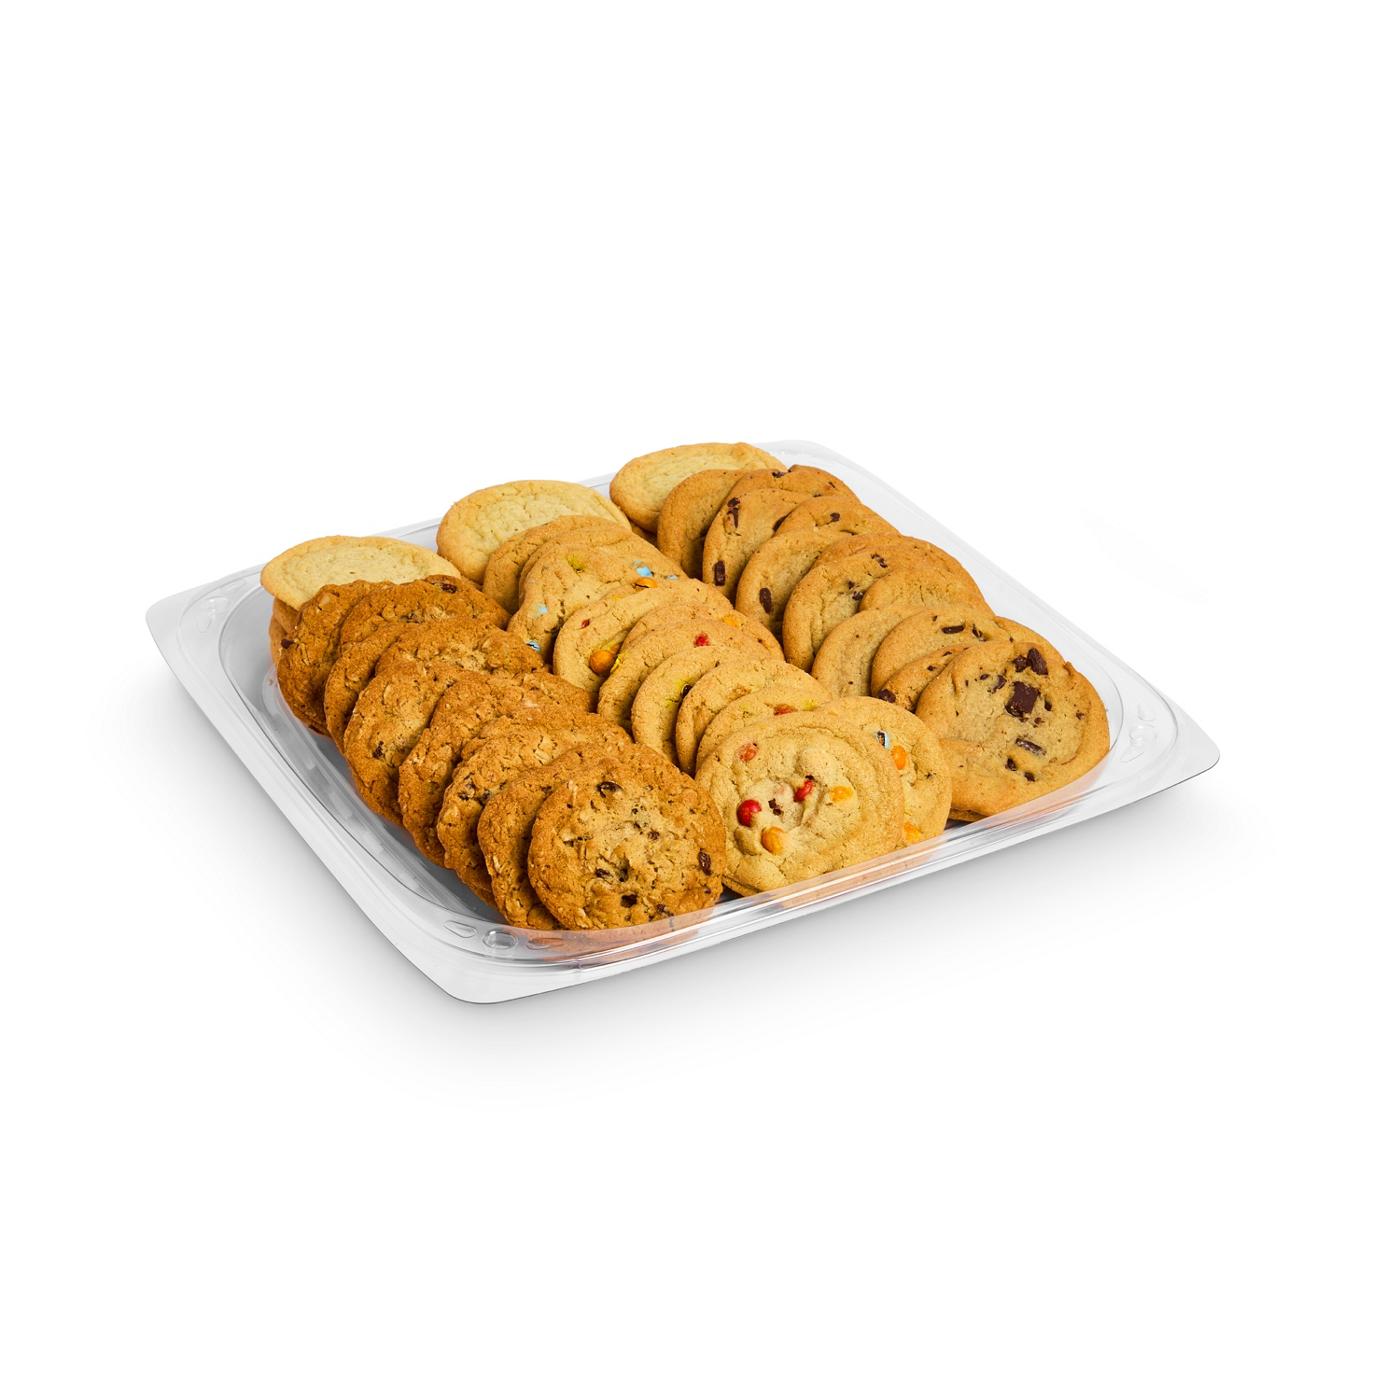 H-E-B Bakery Party Tray - Assorted Cookies; image 3 of 3